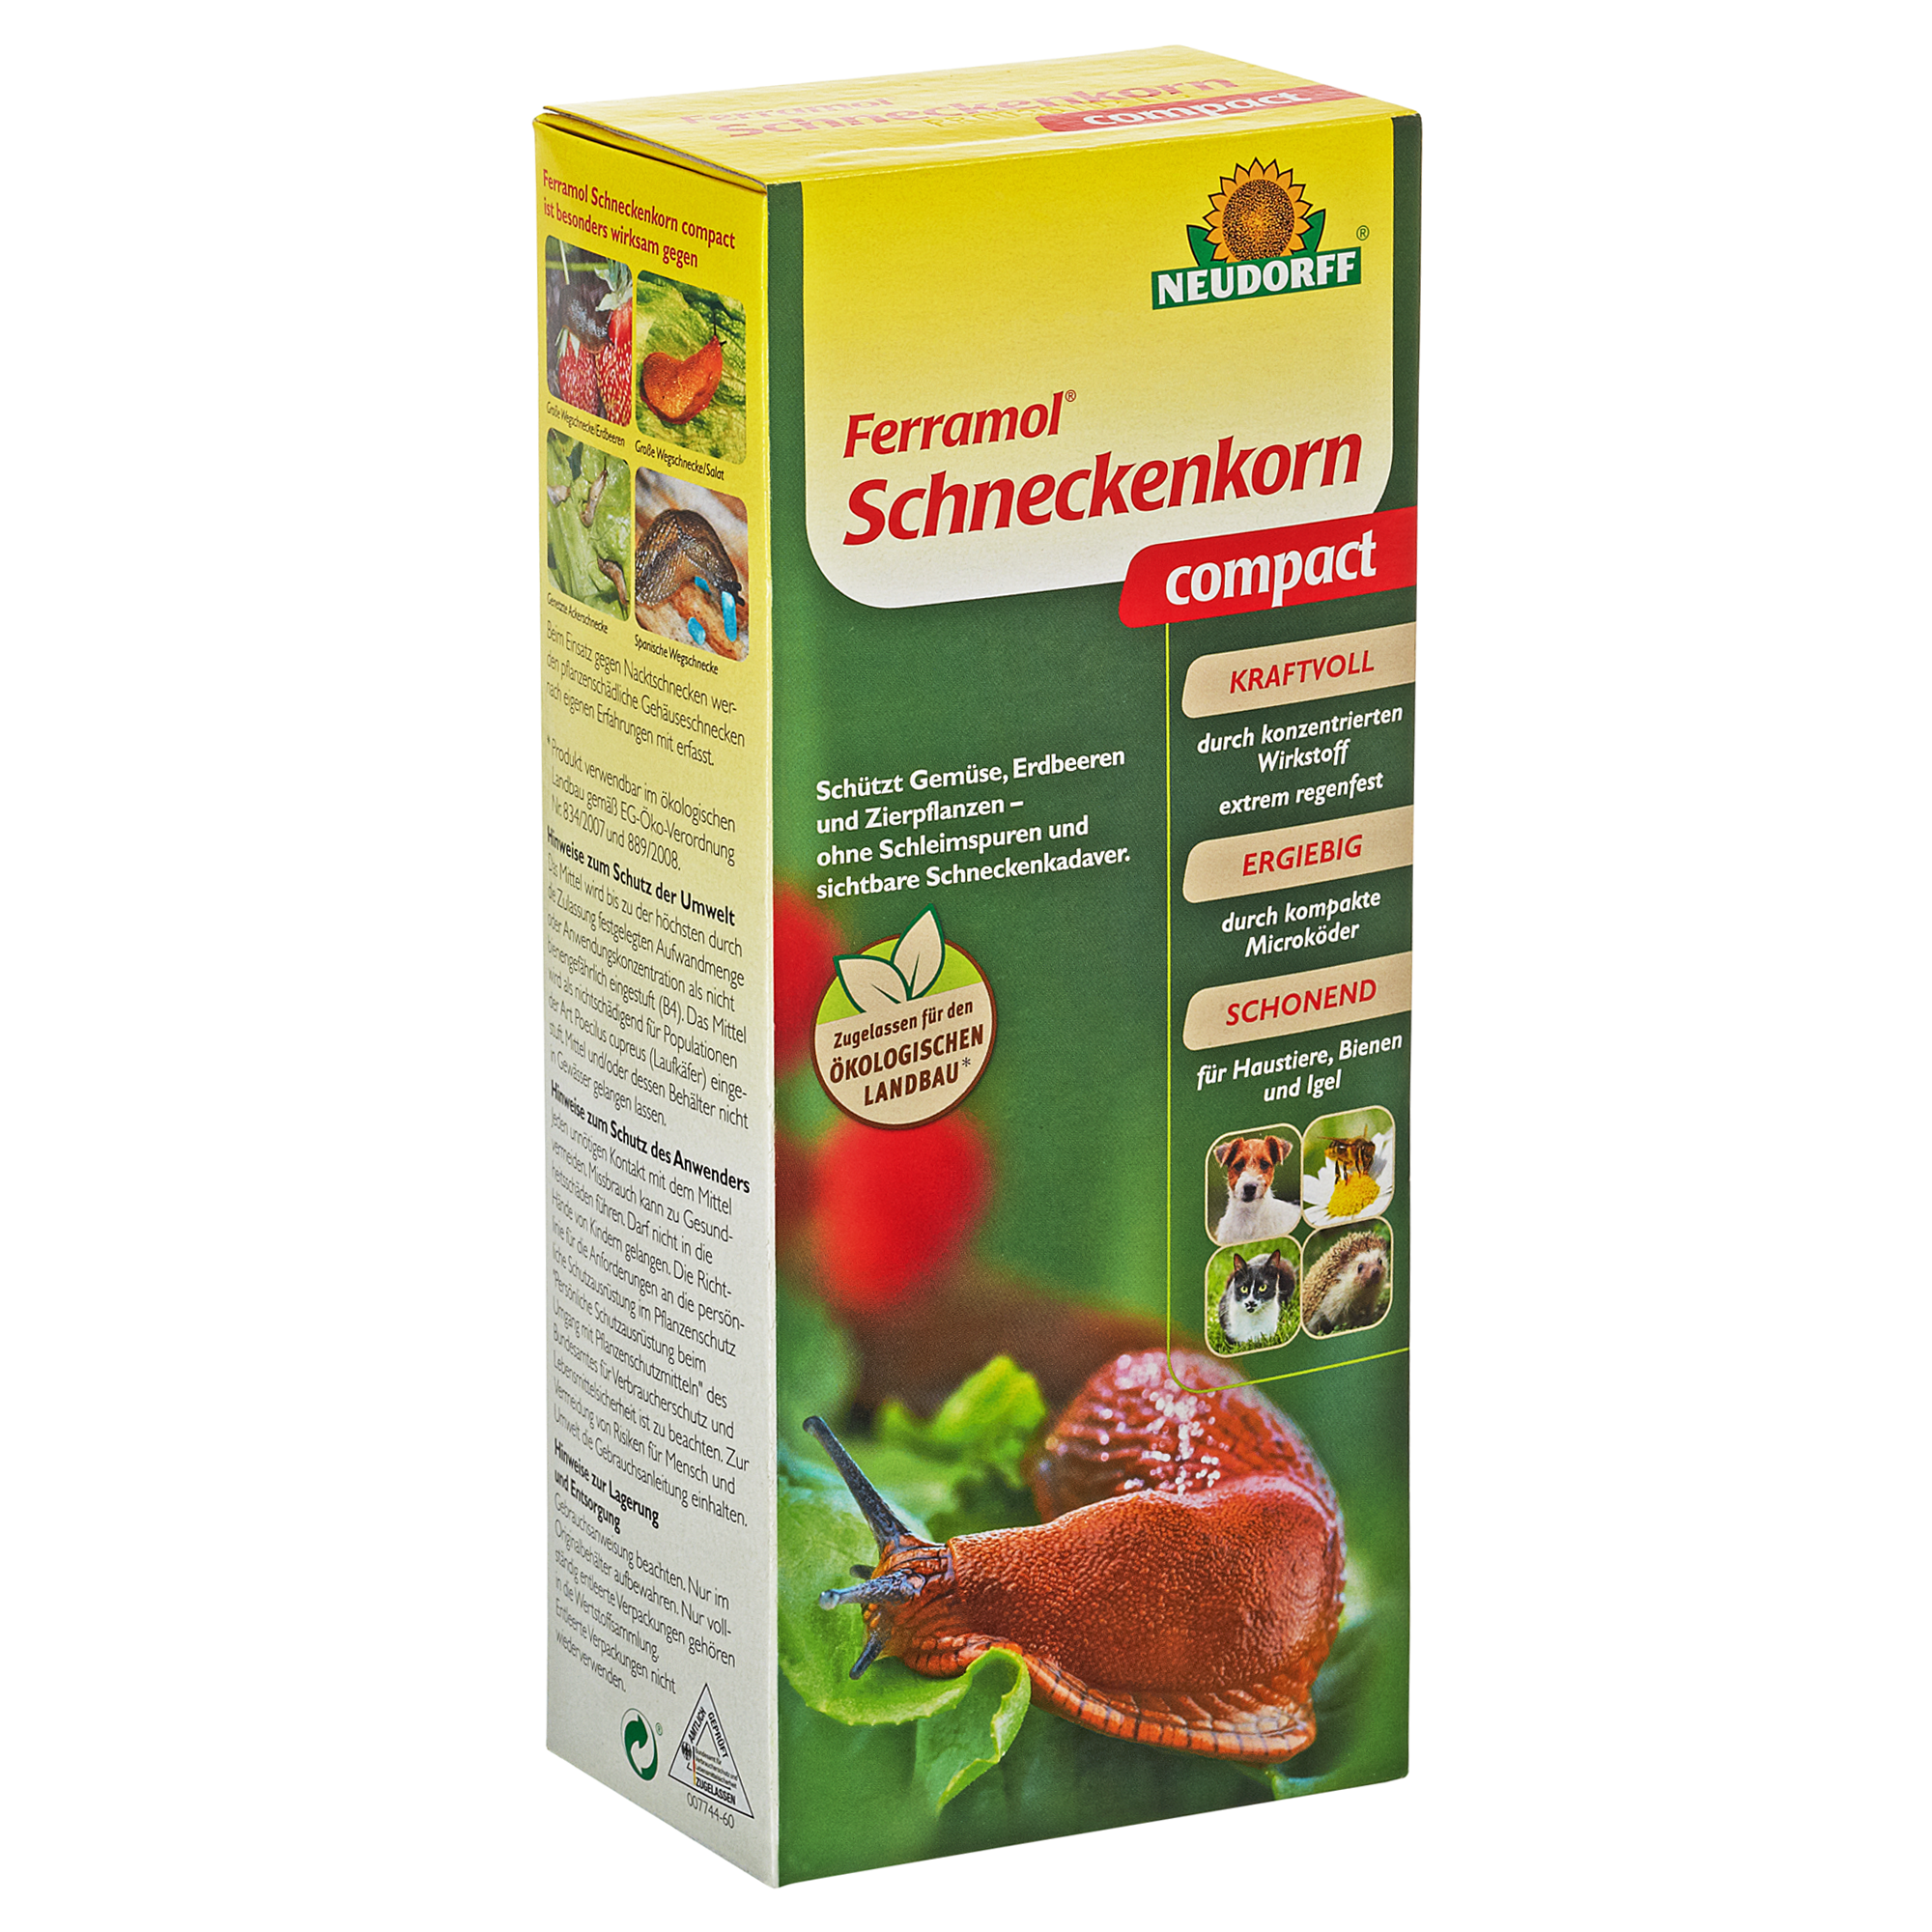 Ferramol Schneckenkorn compact 700 g + product picture